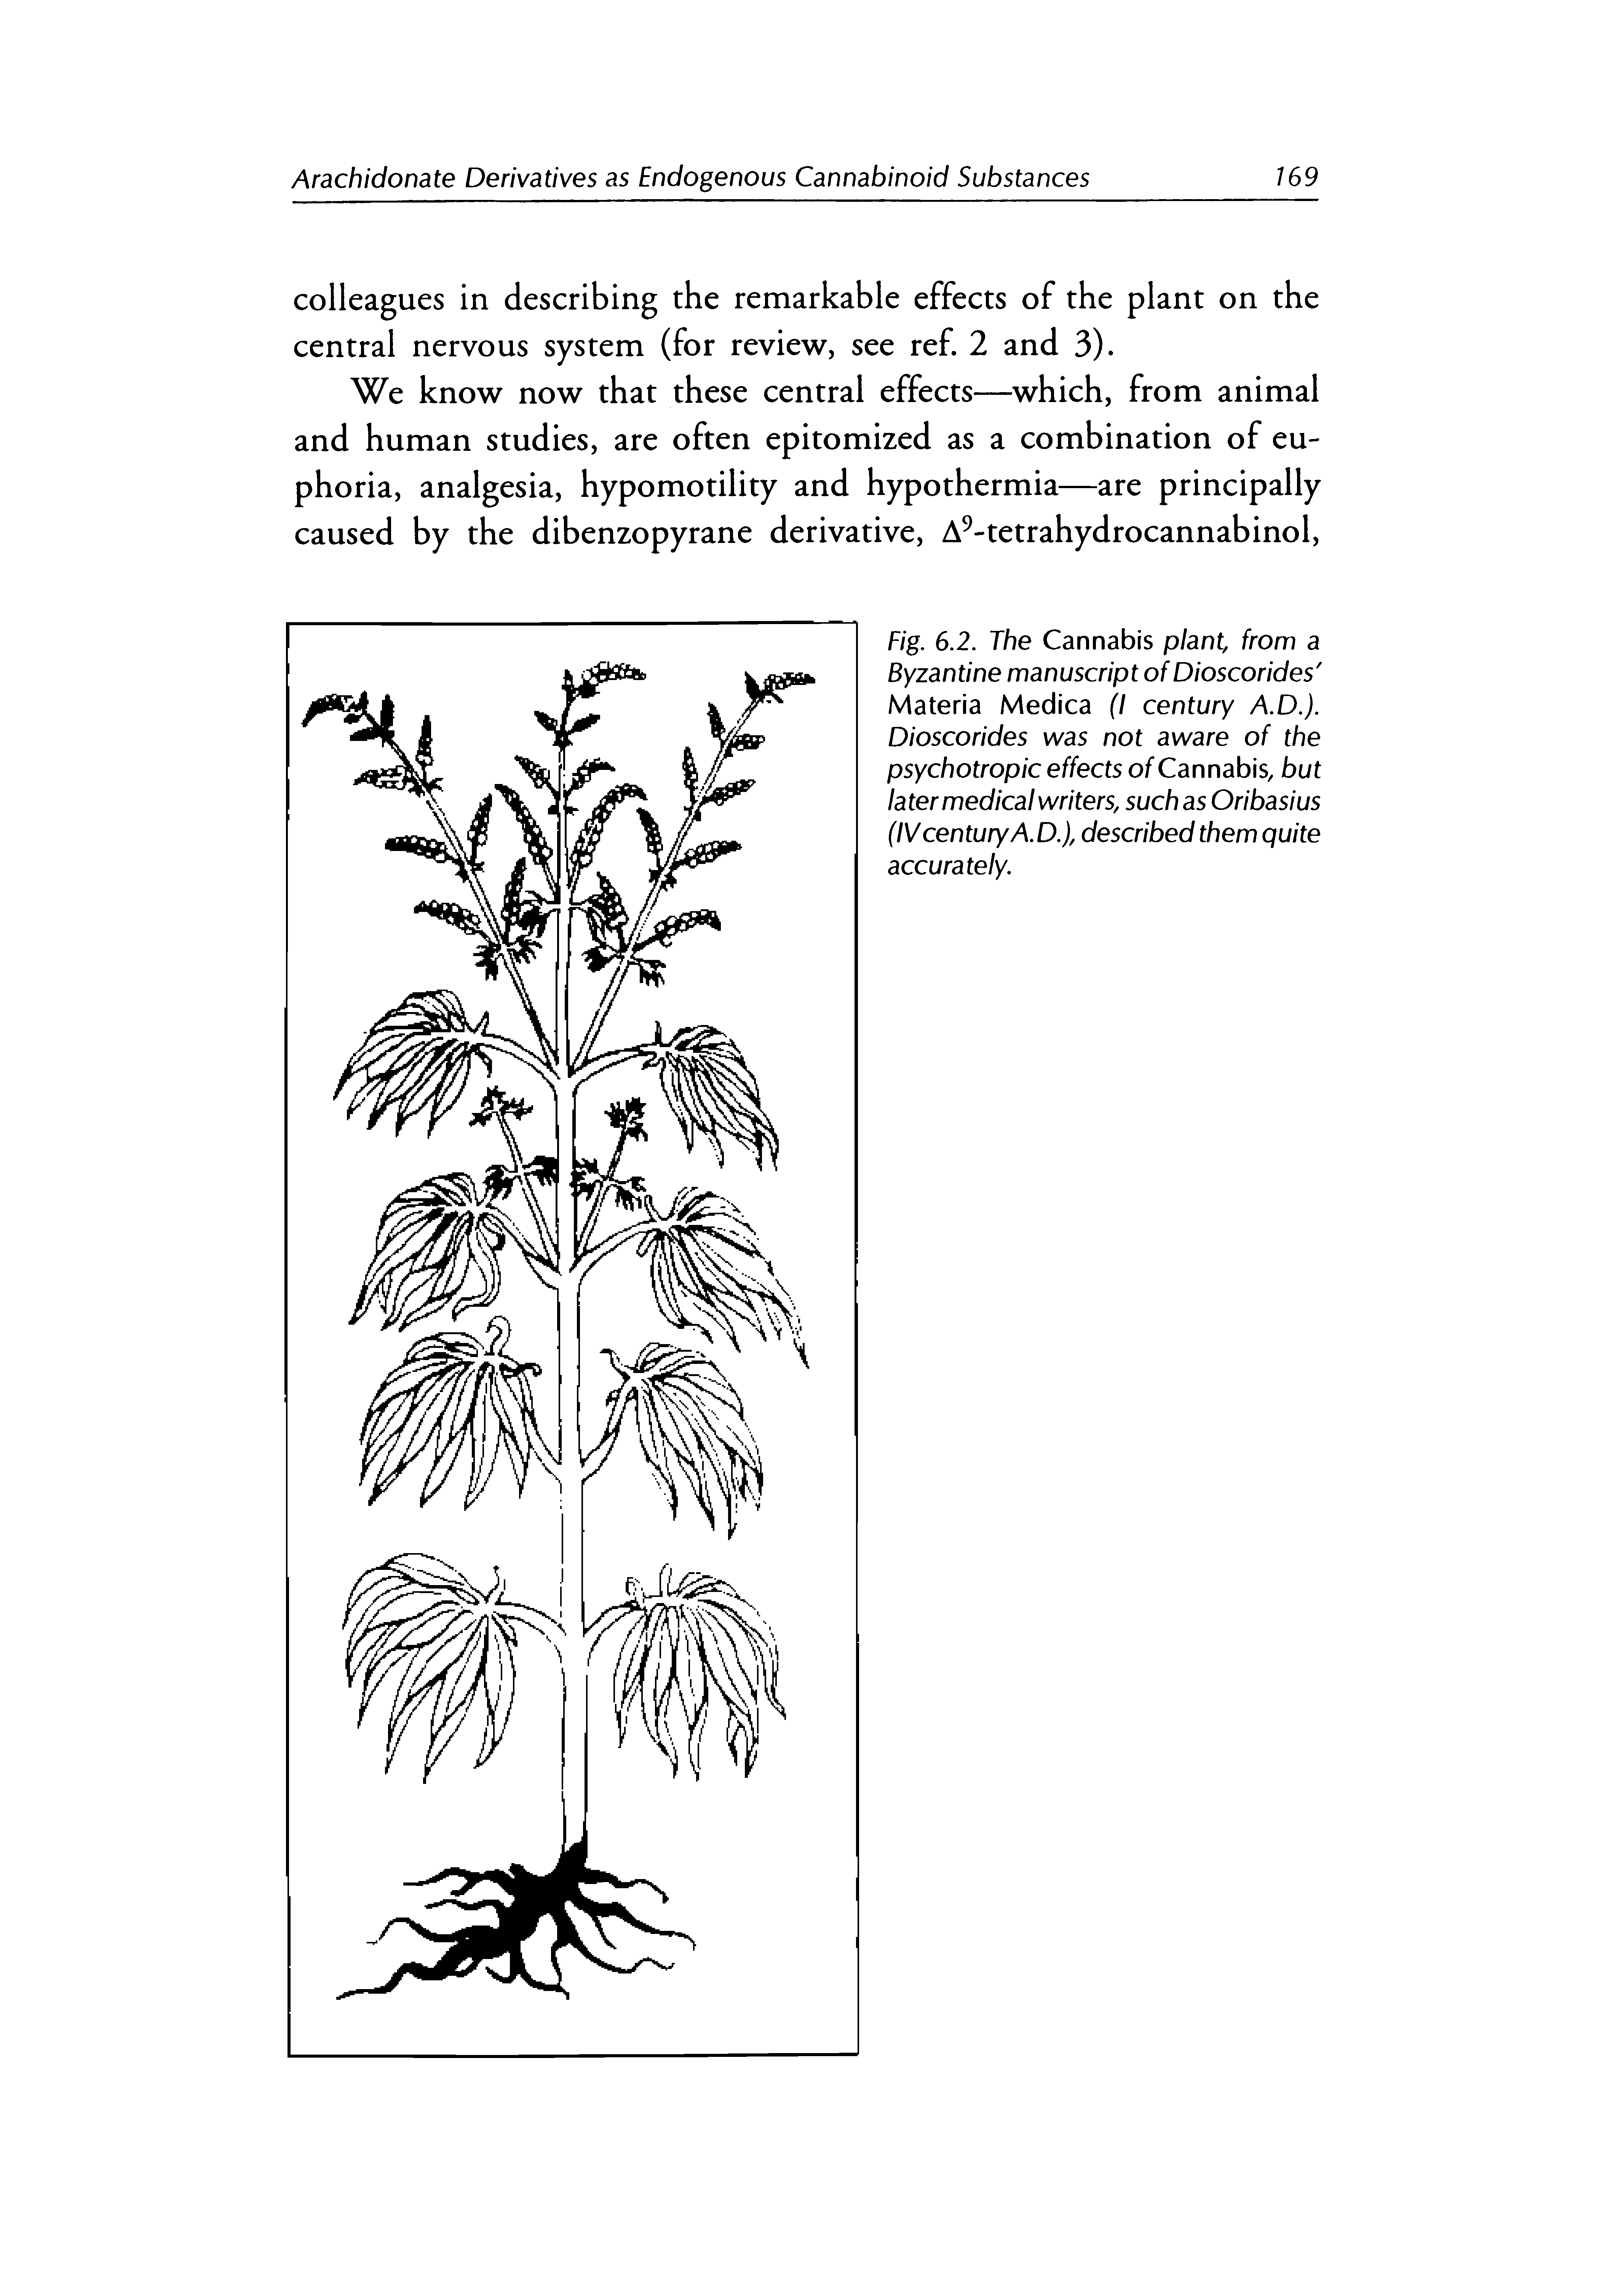 Fig. 6.2. The Cannabis plant, from a Byzantine manuscript of Dioscorides Materia Medica (I century A.D.). Dioscorides was not aware of the psychotropic effects of Cannabis, but later medical writers, such as Oribasius (IV century A. D.), described them quite accurately.